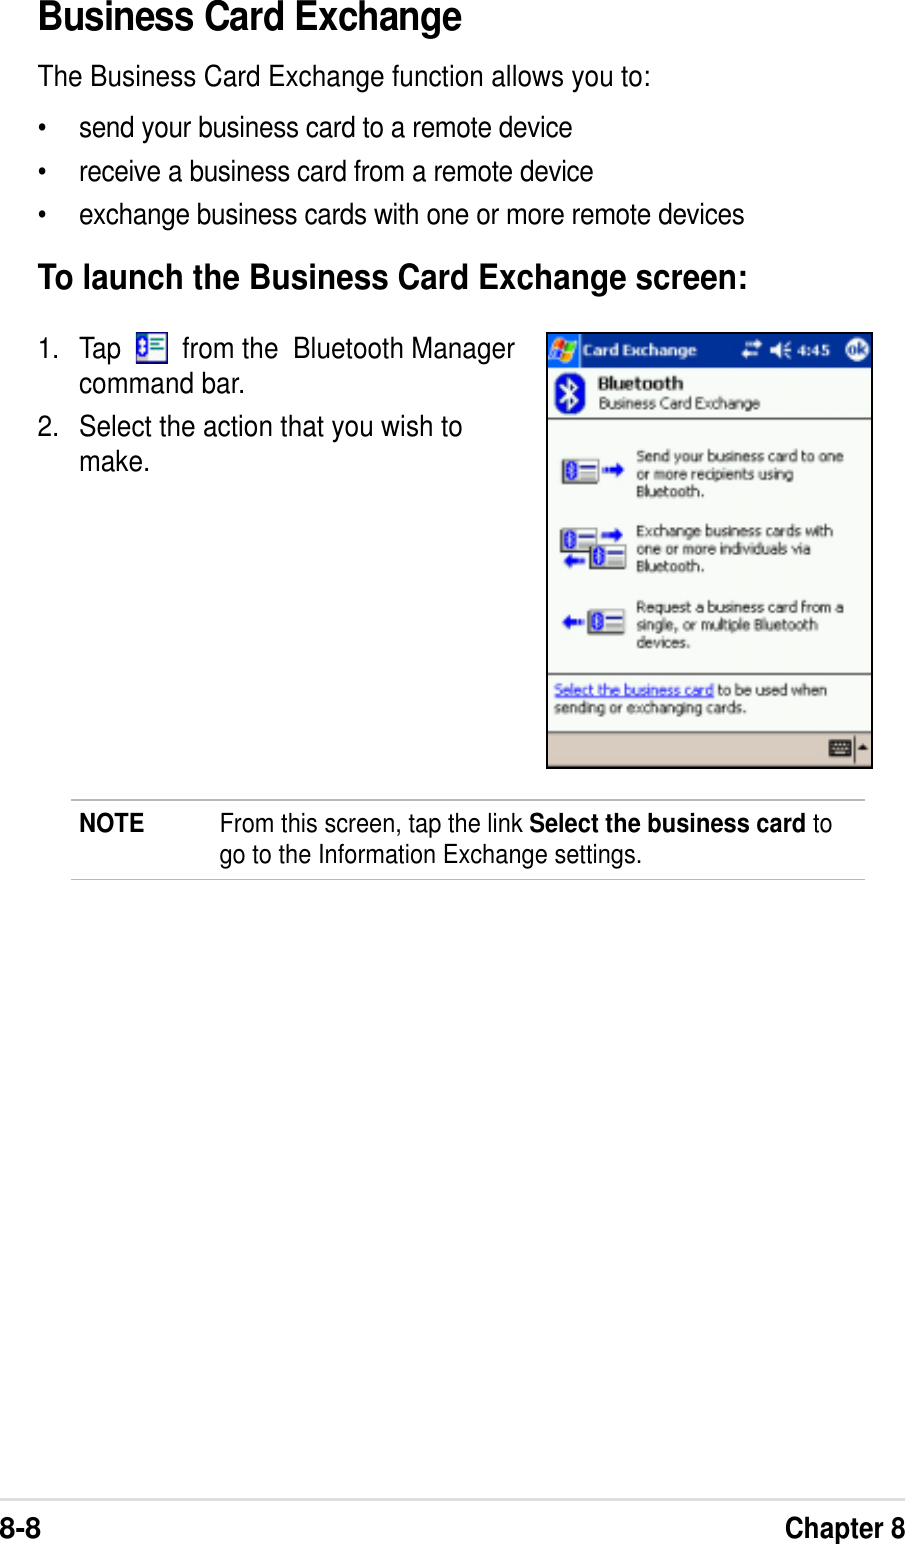 8-8Chapter 8Business Card ExchangeThe Business Card Exchange function allows you to:•send your business card to a remote device•receive a business card from a remote device•exchange business cards with one or more remote devicesTo launch the Business Card Exchange screen:1. Tap     from the  Bluetooth Managercommand bar.2. Select the action that you wish tomake.NOTE From this screen, tap the link Select the business card togo to the Information Exchange settings.